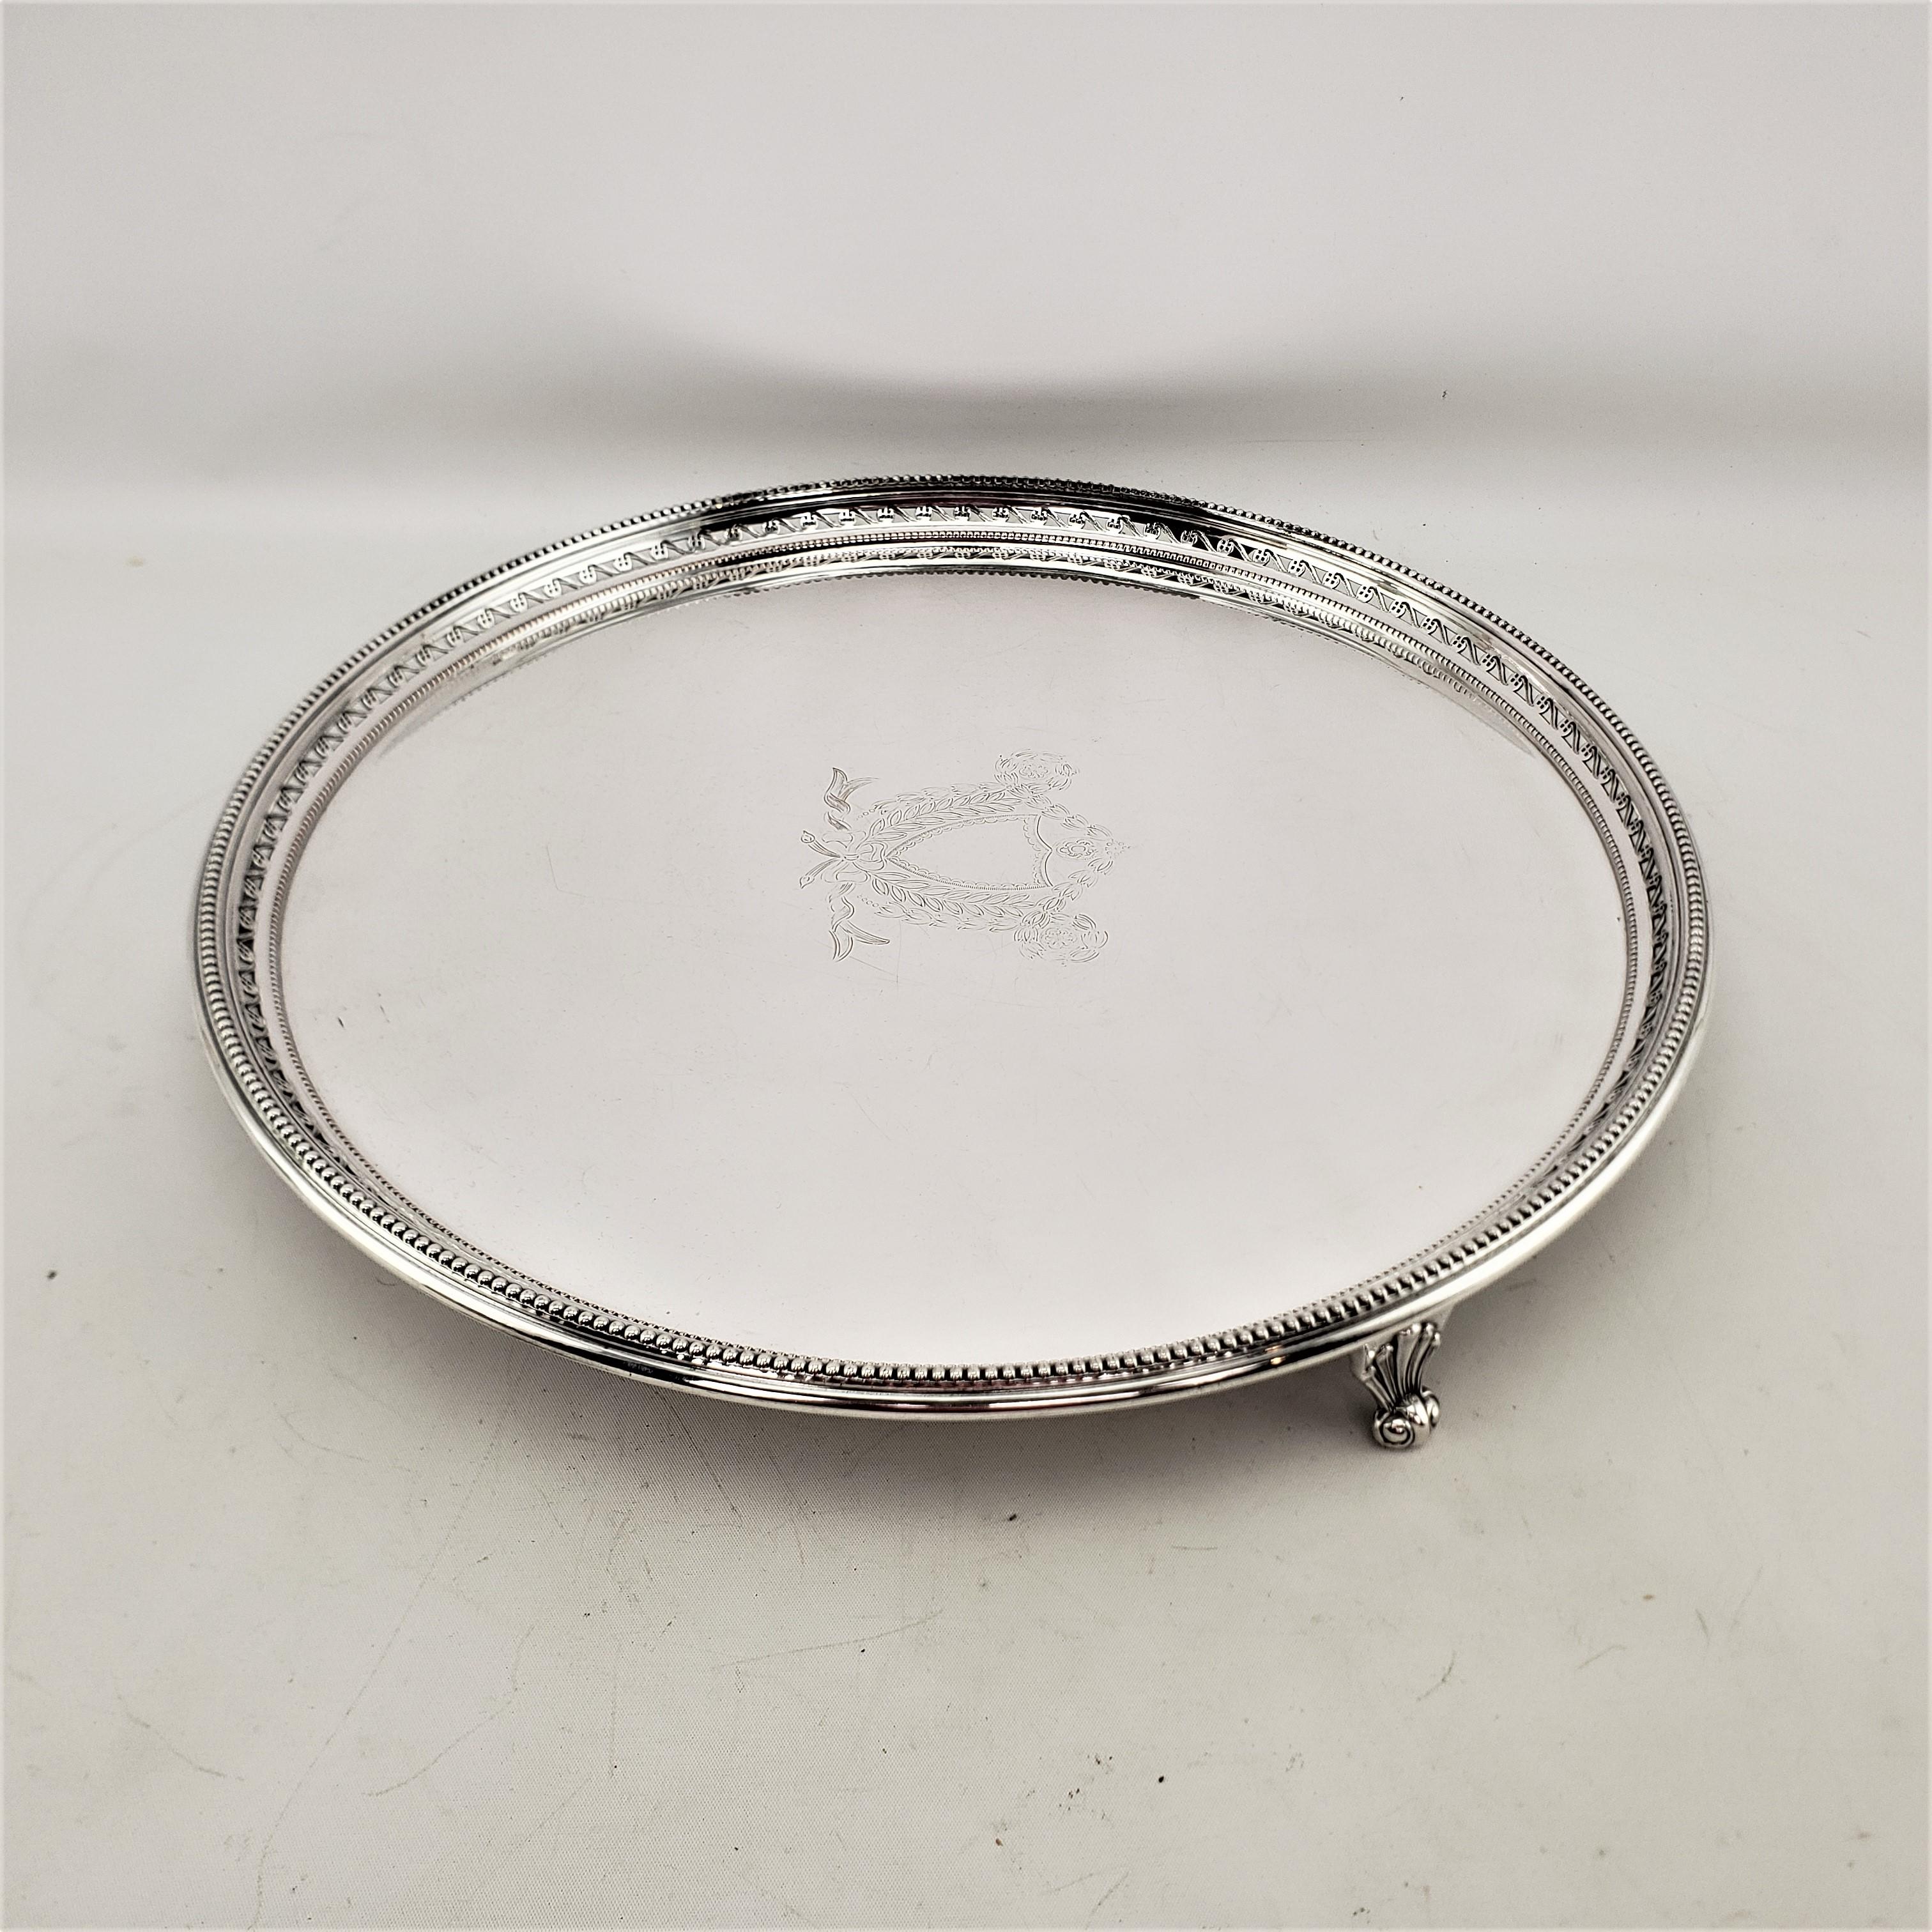 Antique Silver Plated Barker Ellis Round Footed Serving Tray or Salva 1